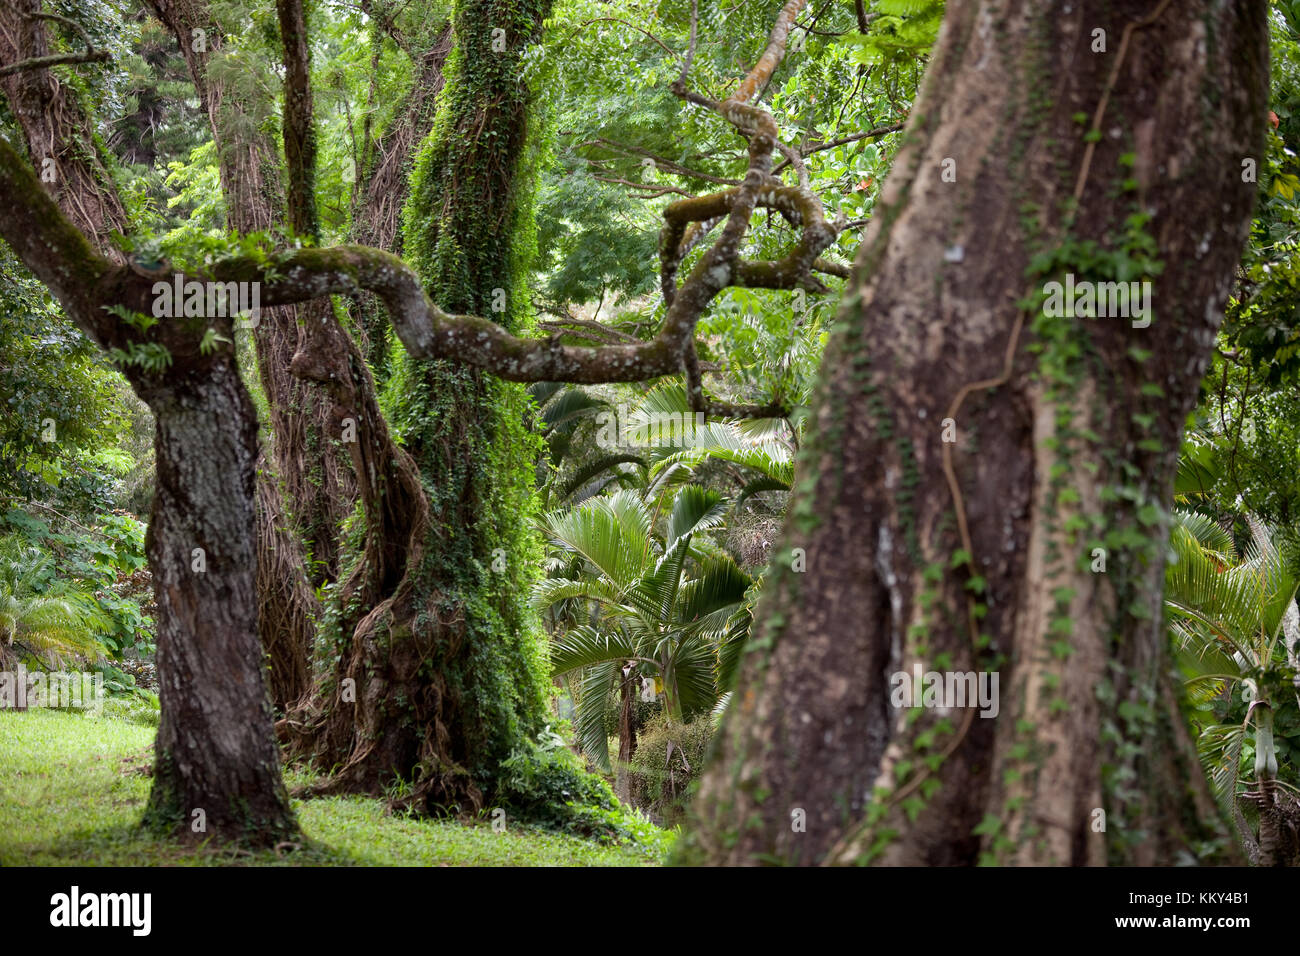 Mauritius - Africa - Old giant trees Stock Photo